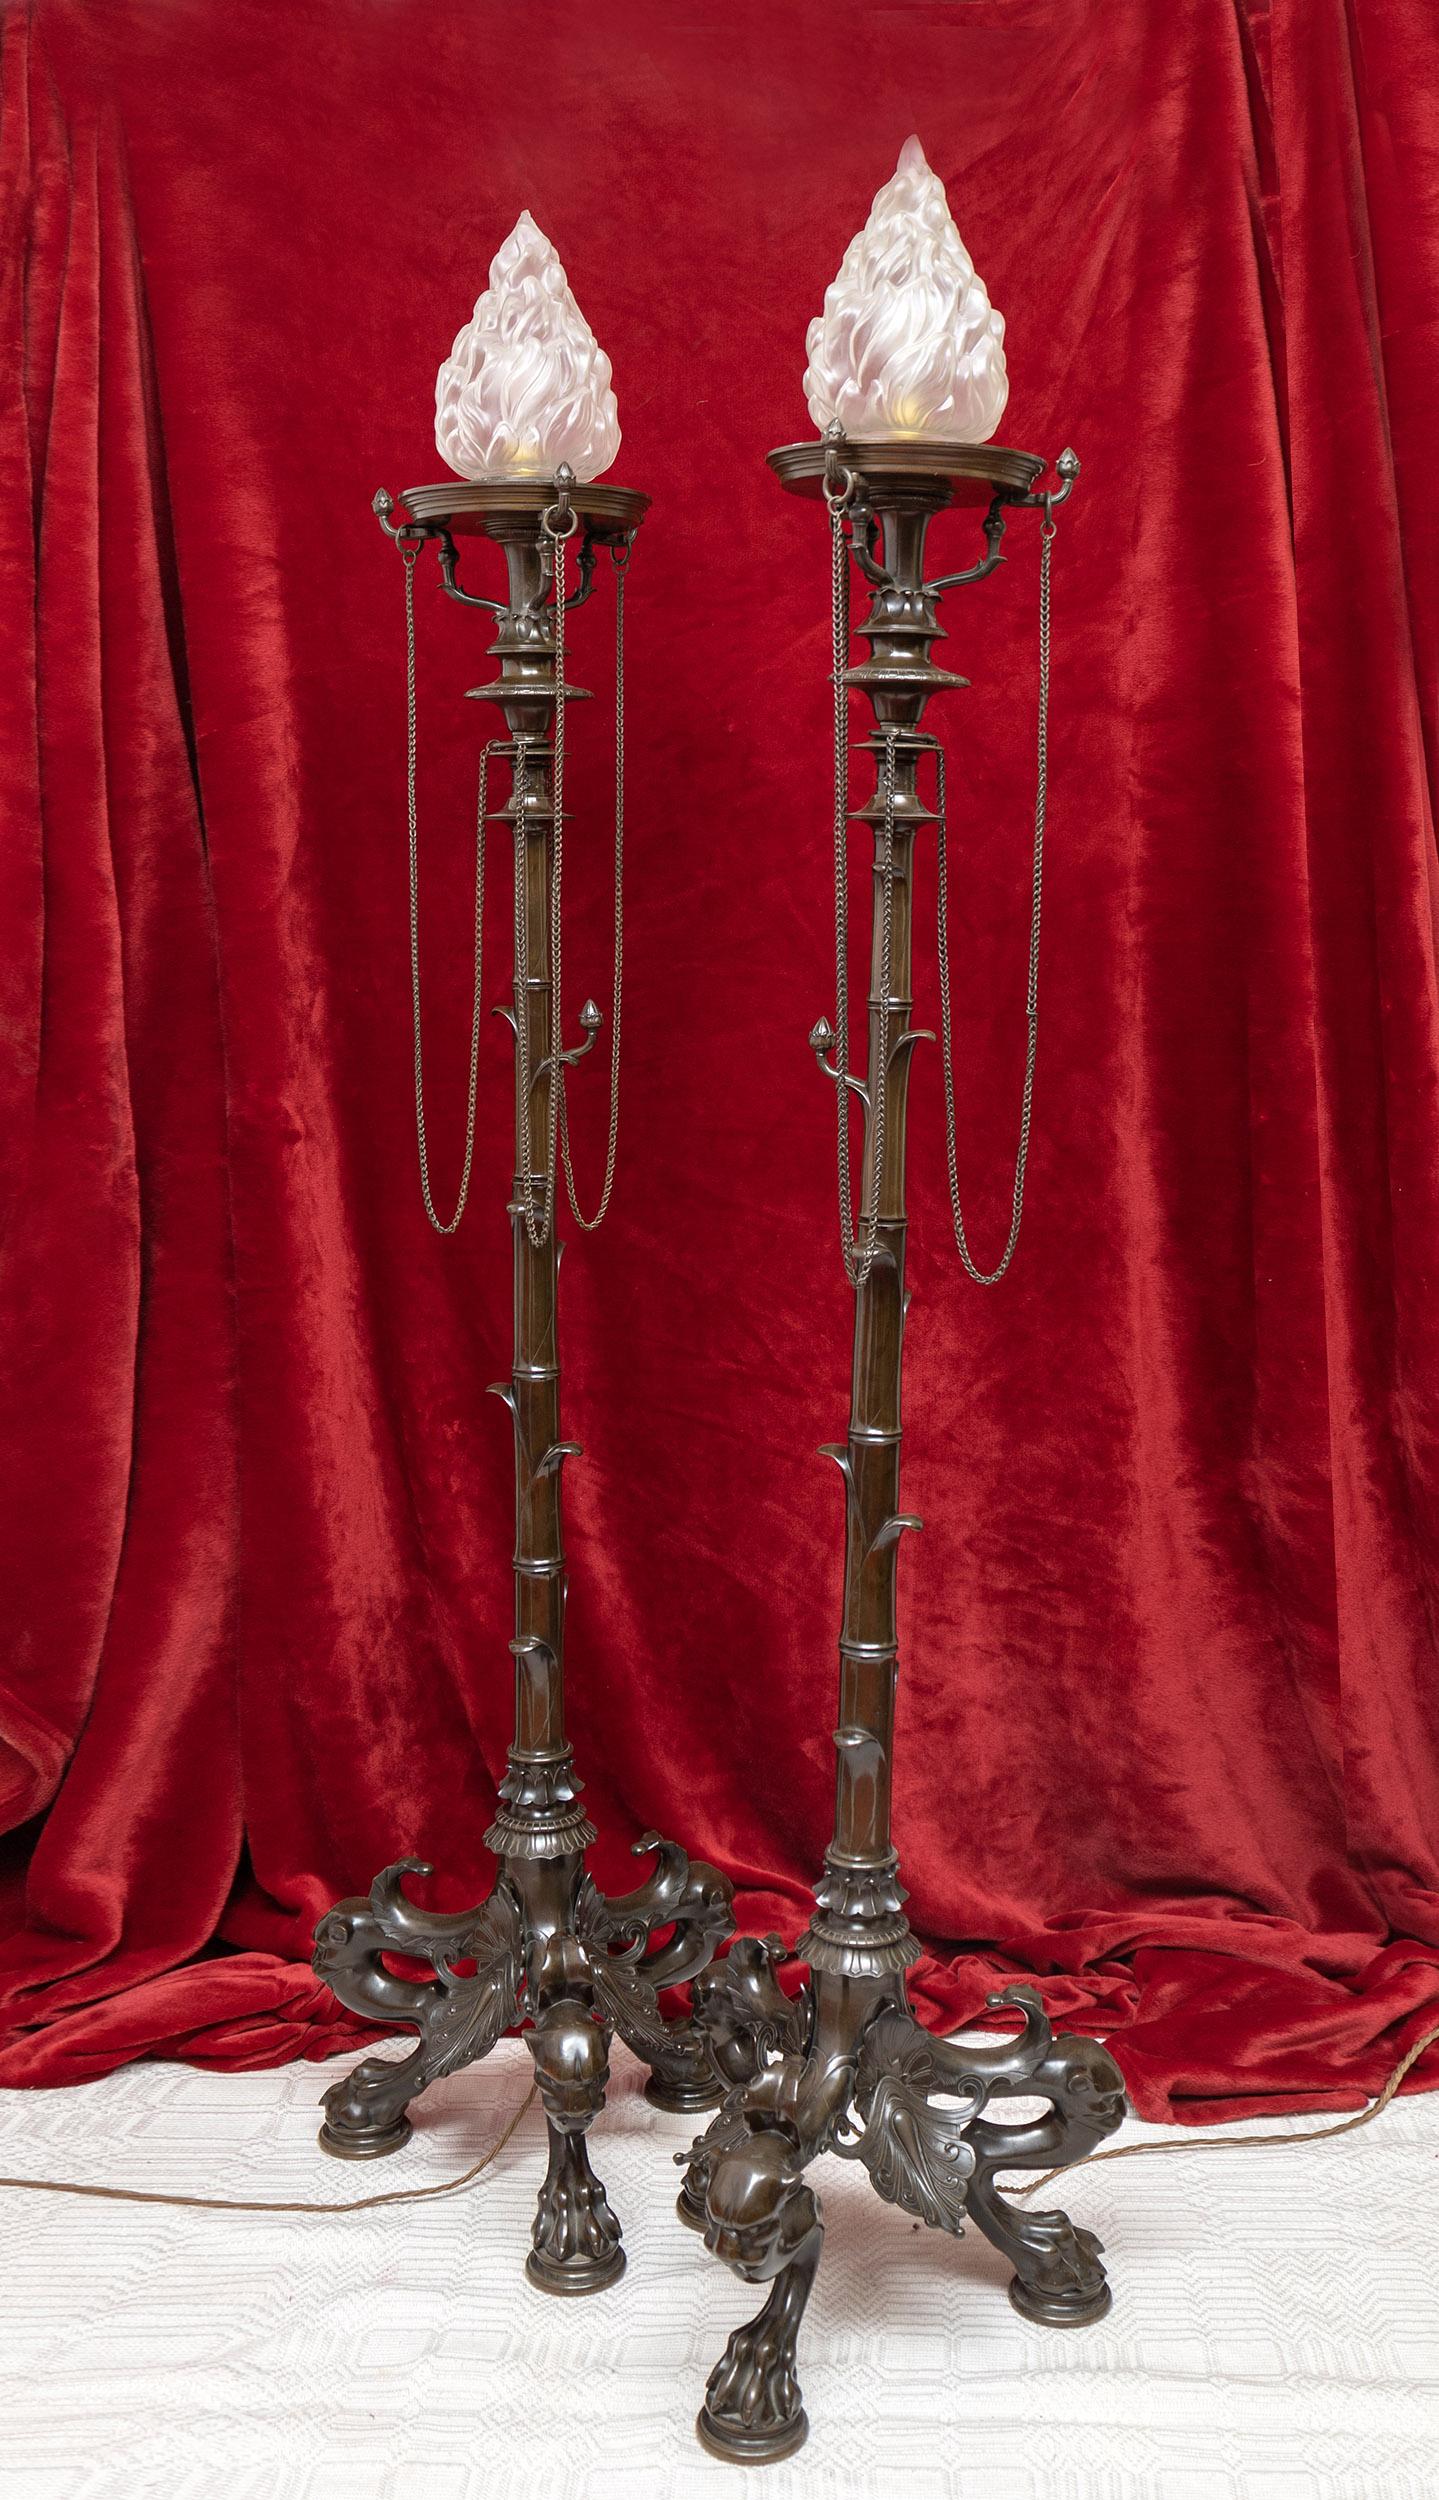 Manufactured in France by the renowned Ferdinand Barbedienne and designed by Henry Cahieux specifically for the iconic 1855 Paris Exposition Universelle. The stands with deep brown patina and suspended chains are finely cast with lost-wax bronze and